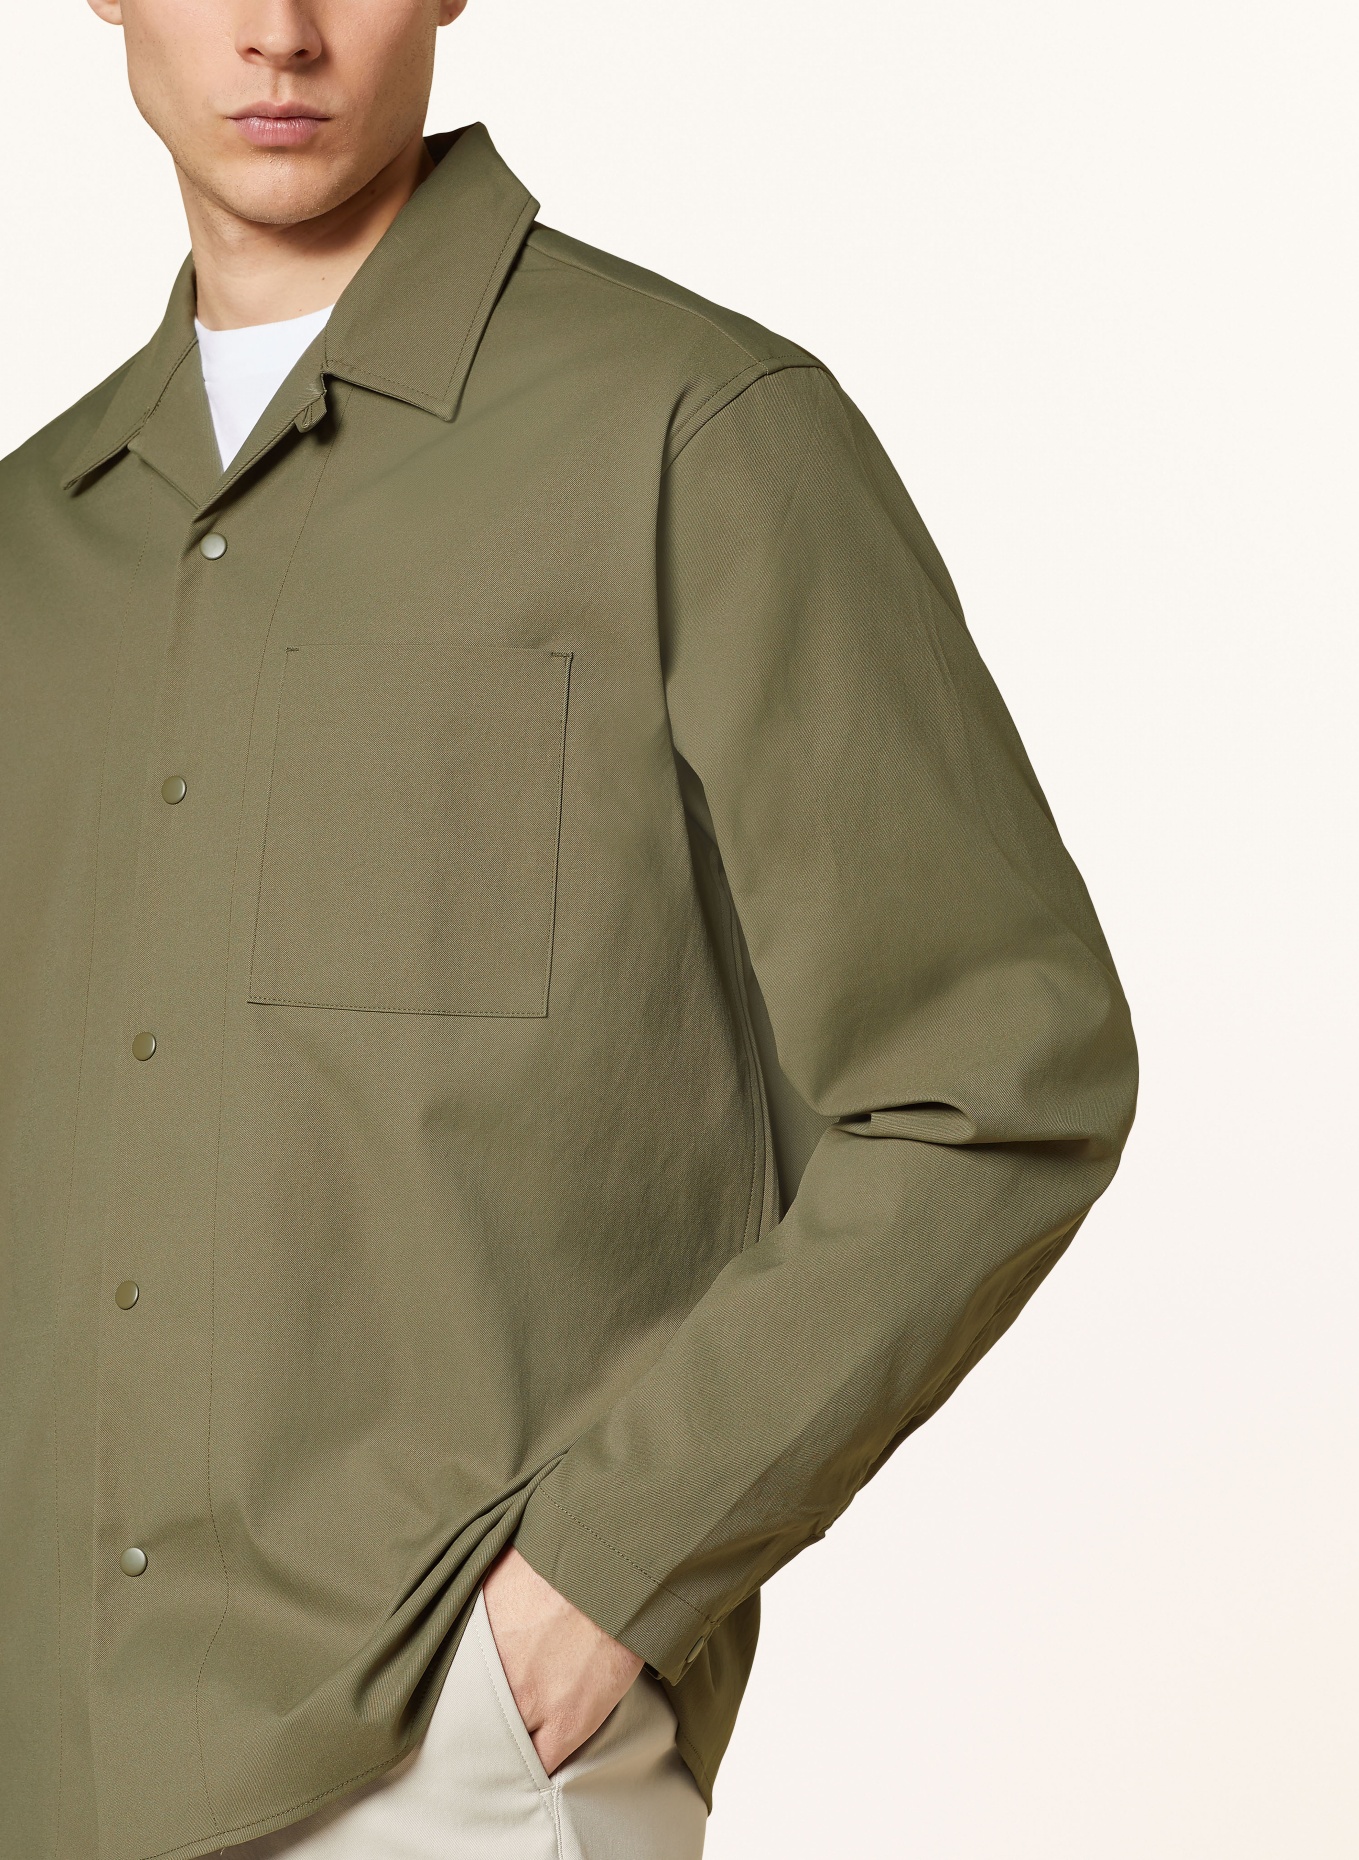 NORSE PROJECTS Overshirt CARSTEN, Farbe: OLIV (Bild 4)